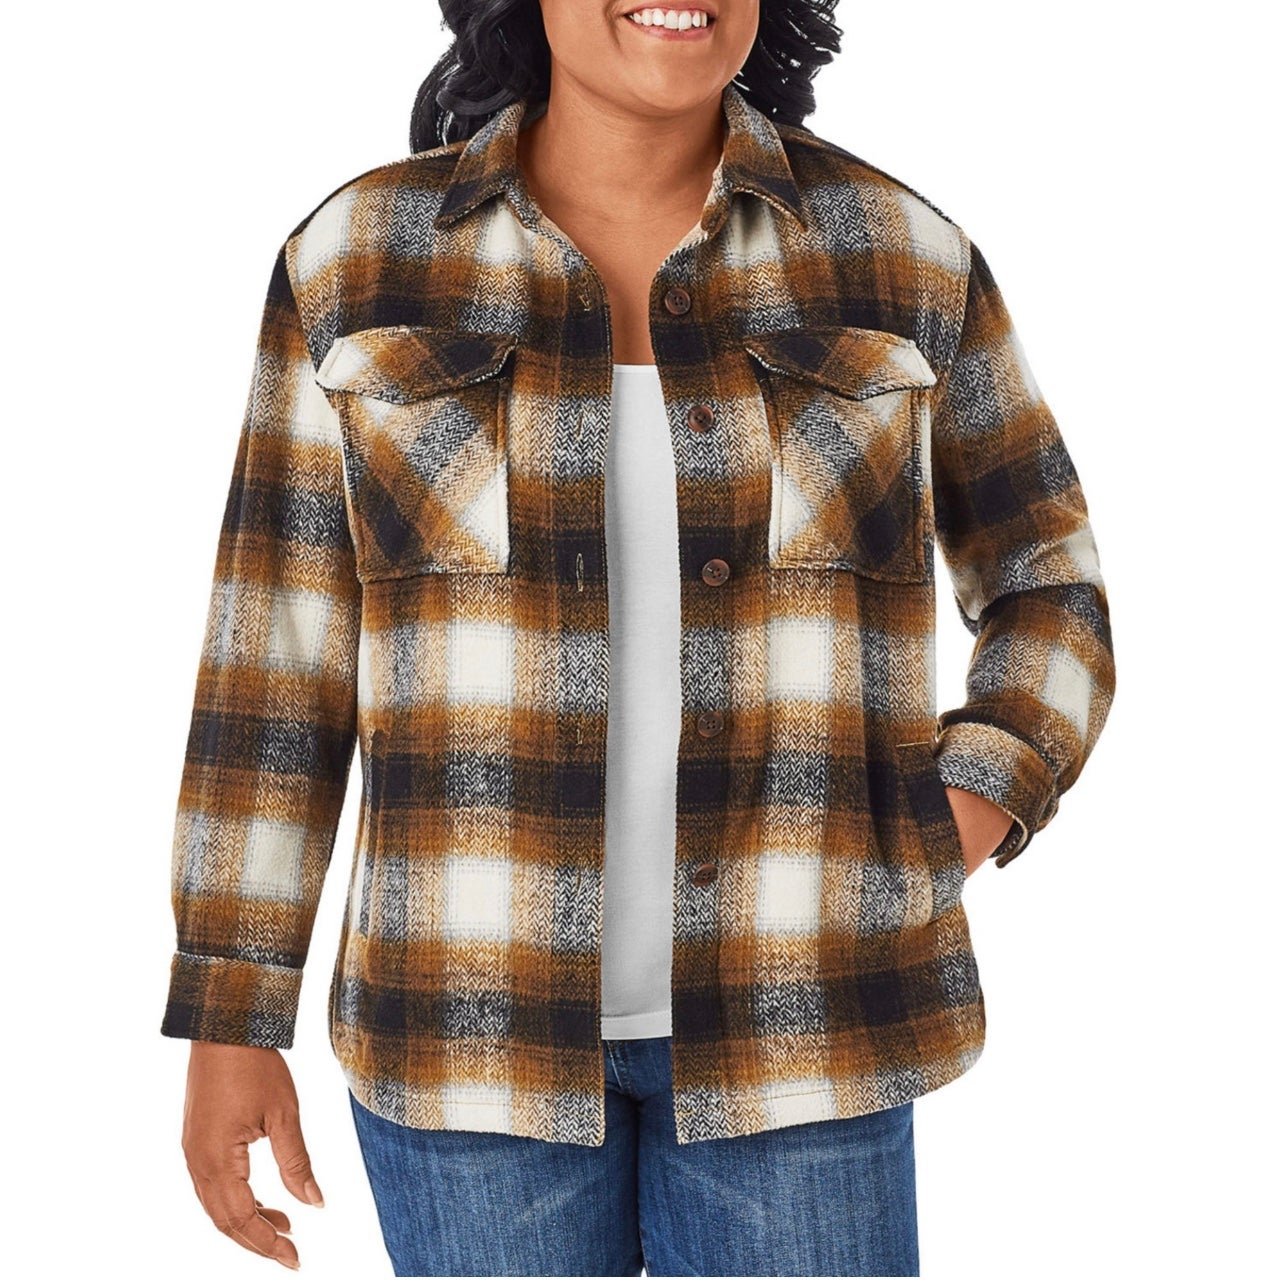 high discount Plaid Shacket for Women Size XS #62 lkWogKEMk Everyday Low Prices